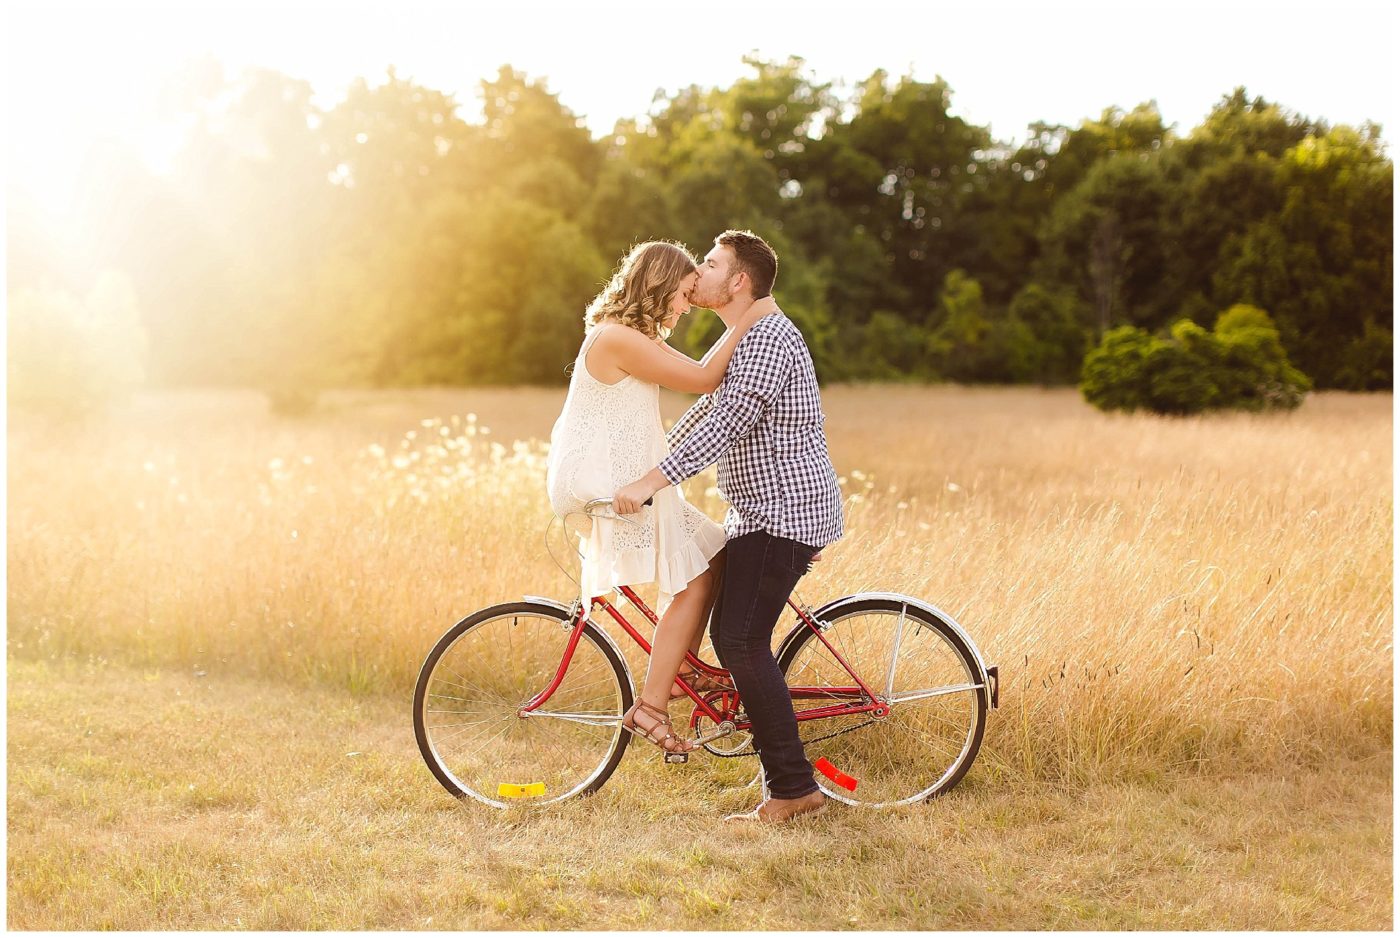 Adorable Bike Engagement Session in the Country, Fort Wayne Wedding Photography_0006